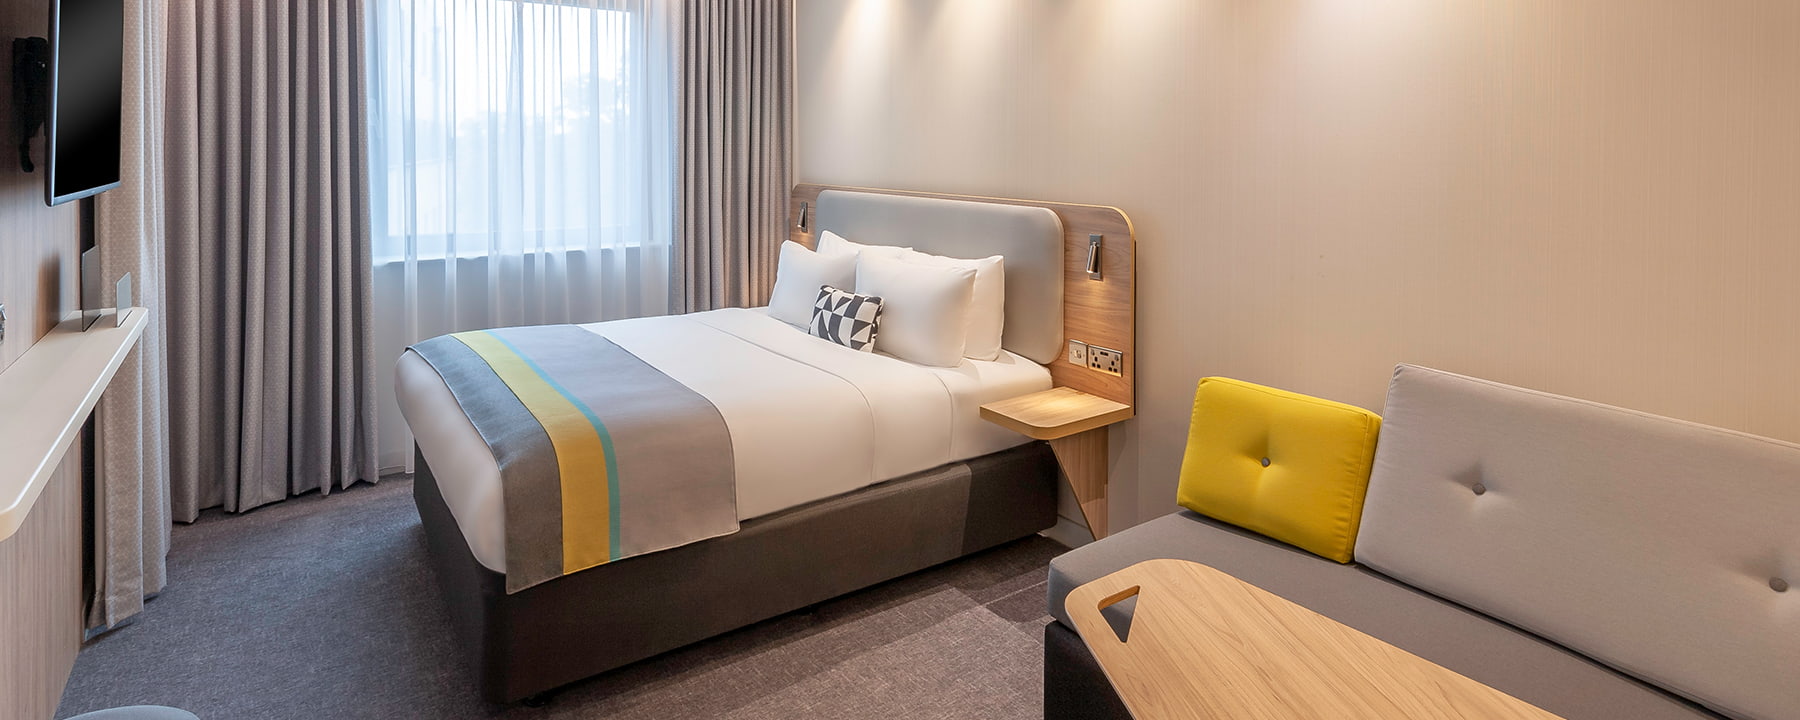 Dublin airport hotel double bed room